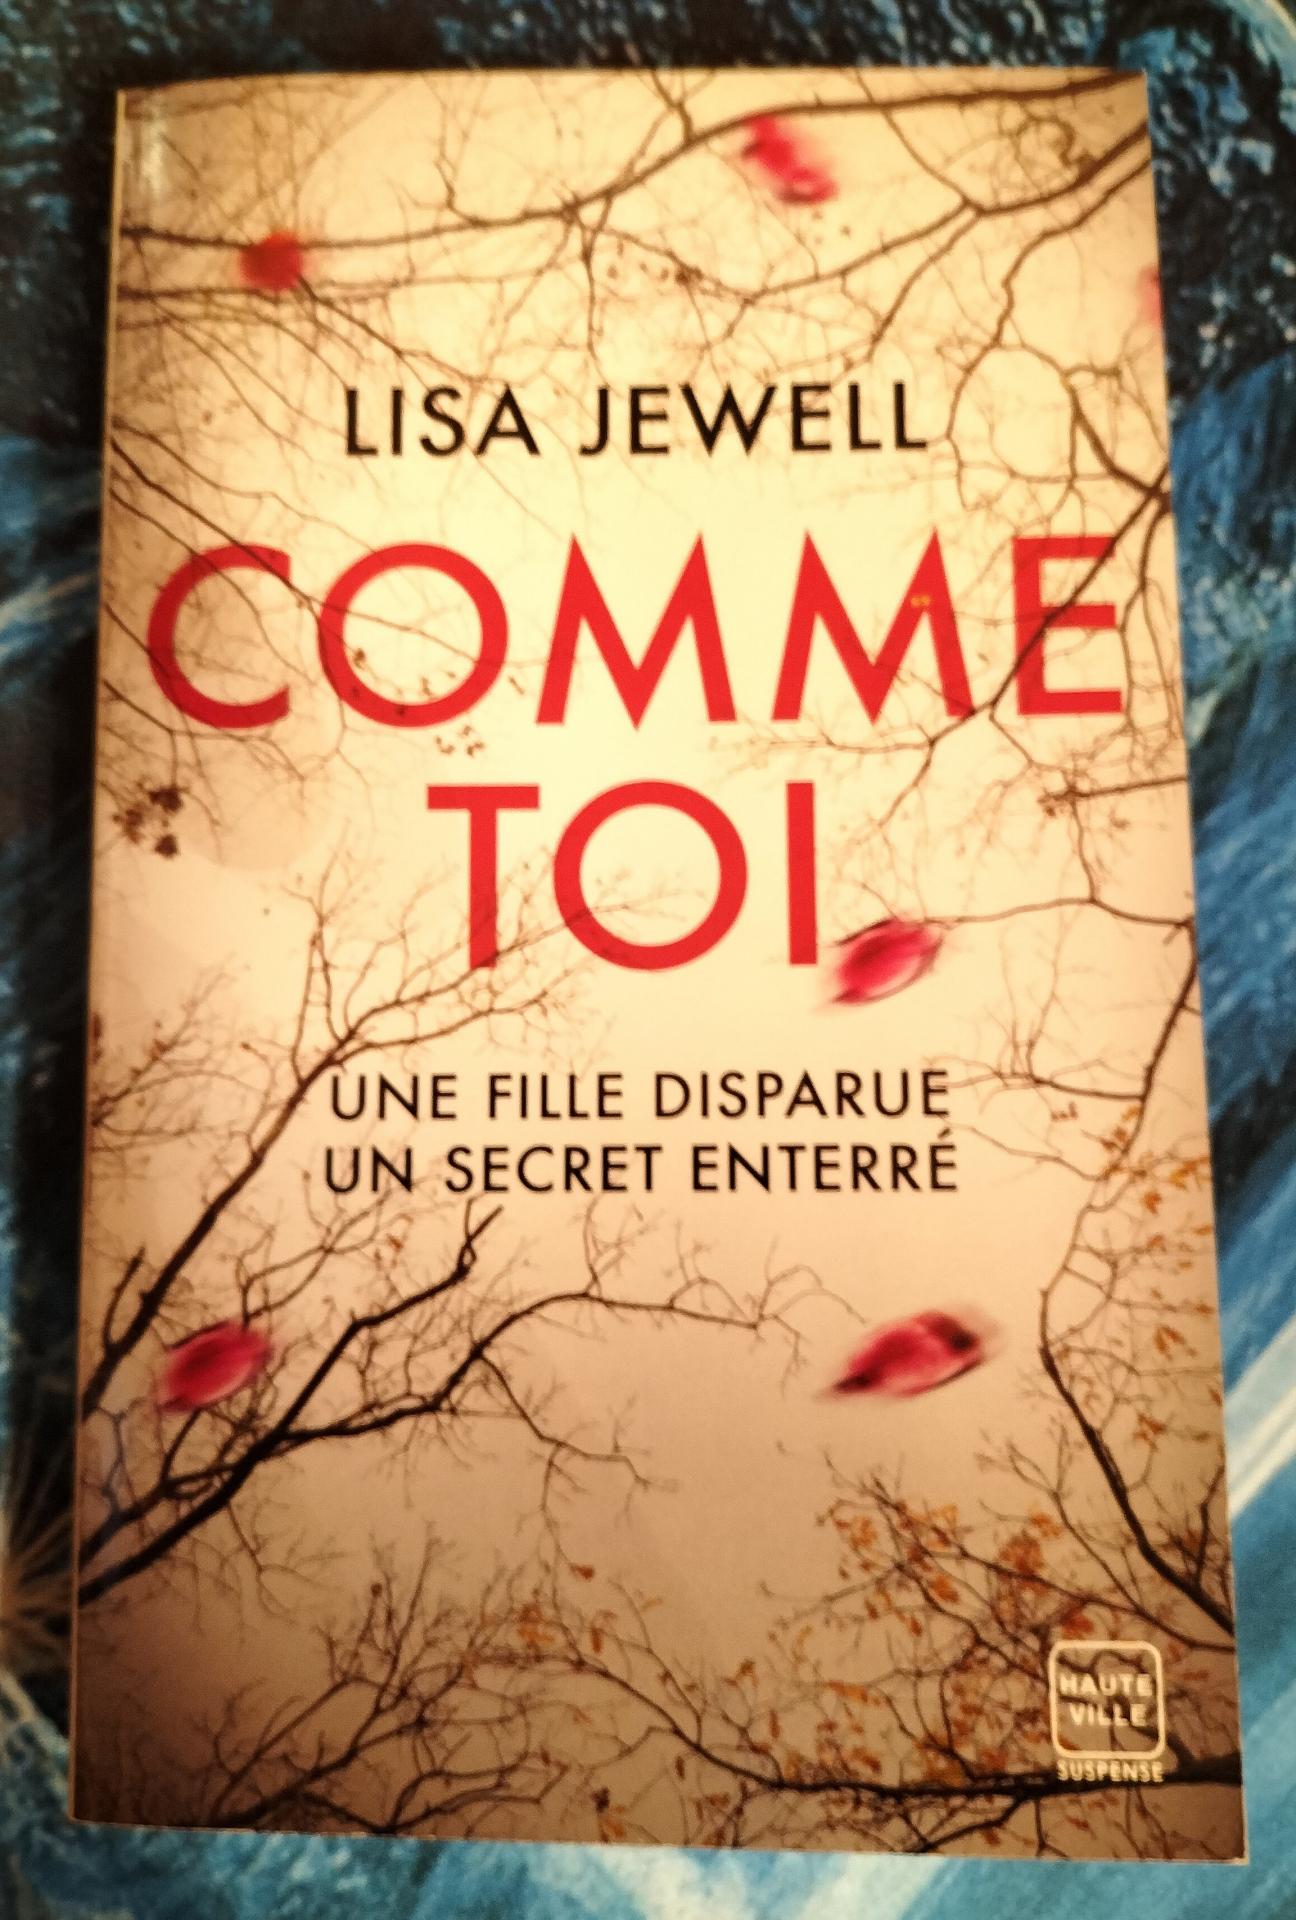 Comme toi lisa jewell